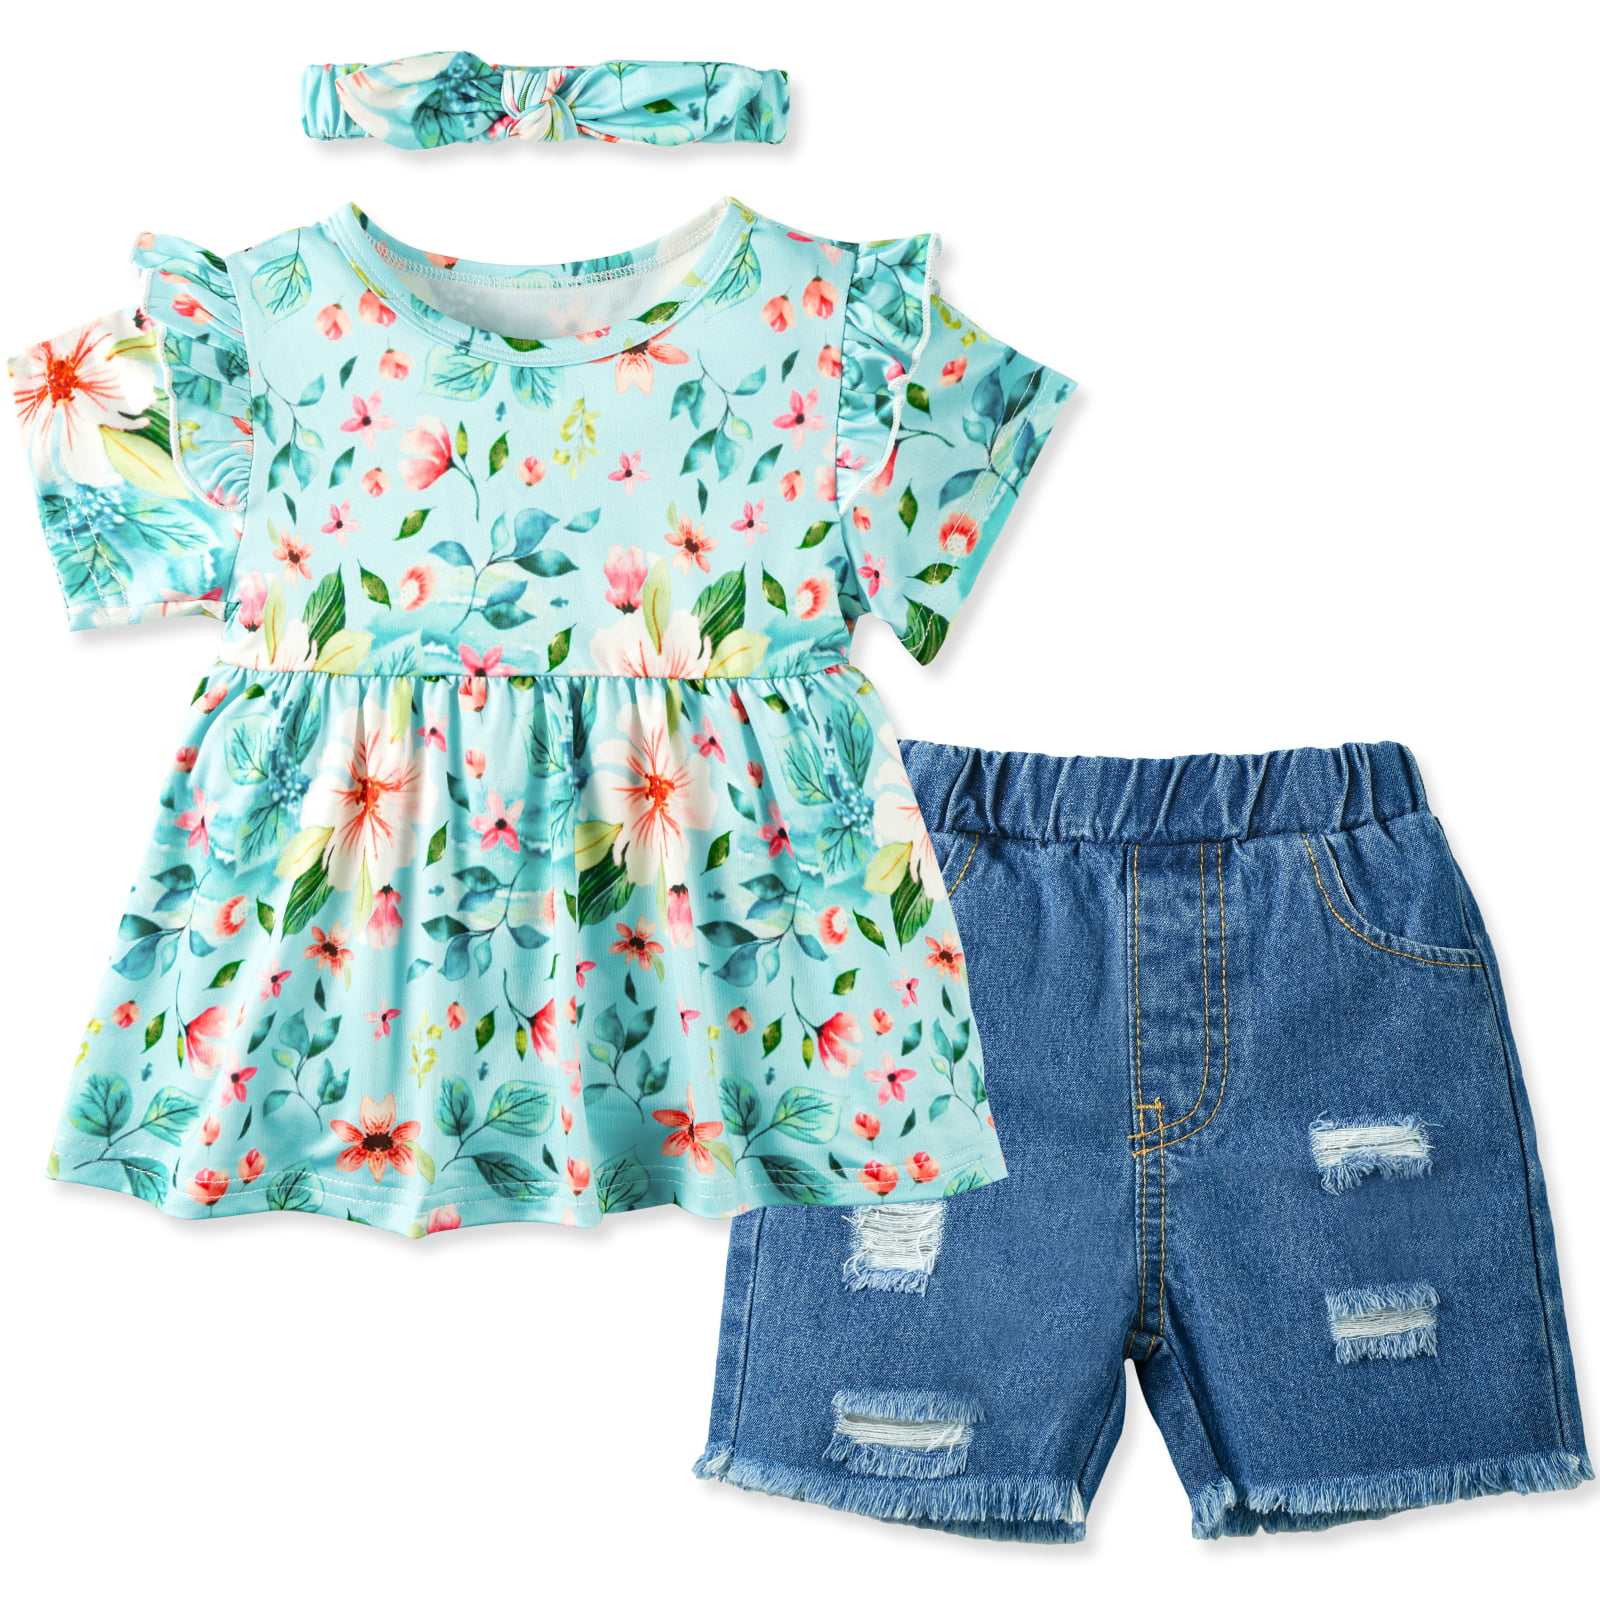 Ripped Denim Shorts Set 6M-4T Toddler Girl Outfits Baby Girl Summer Clothes Ruffled Floral Printed Shirt Tops 